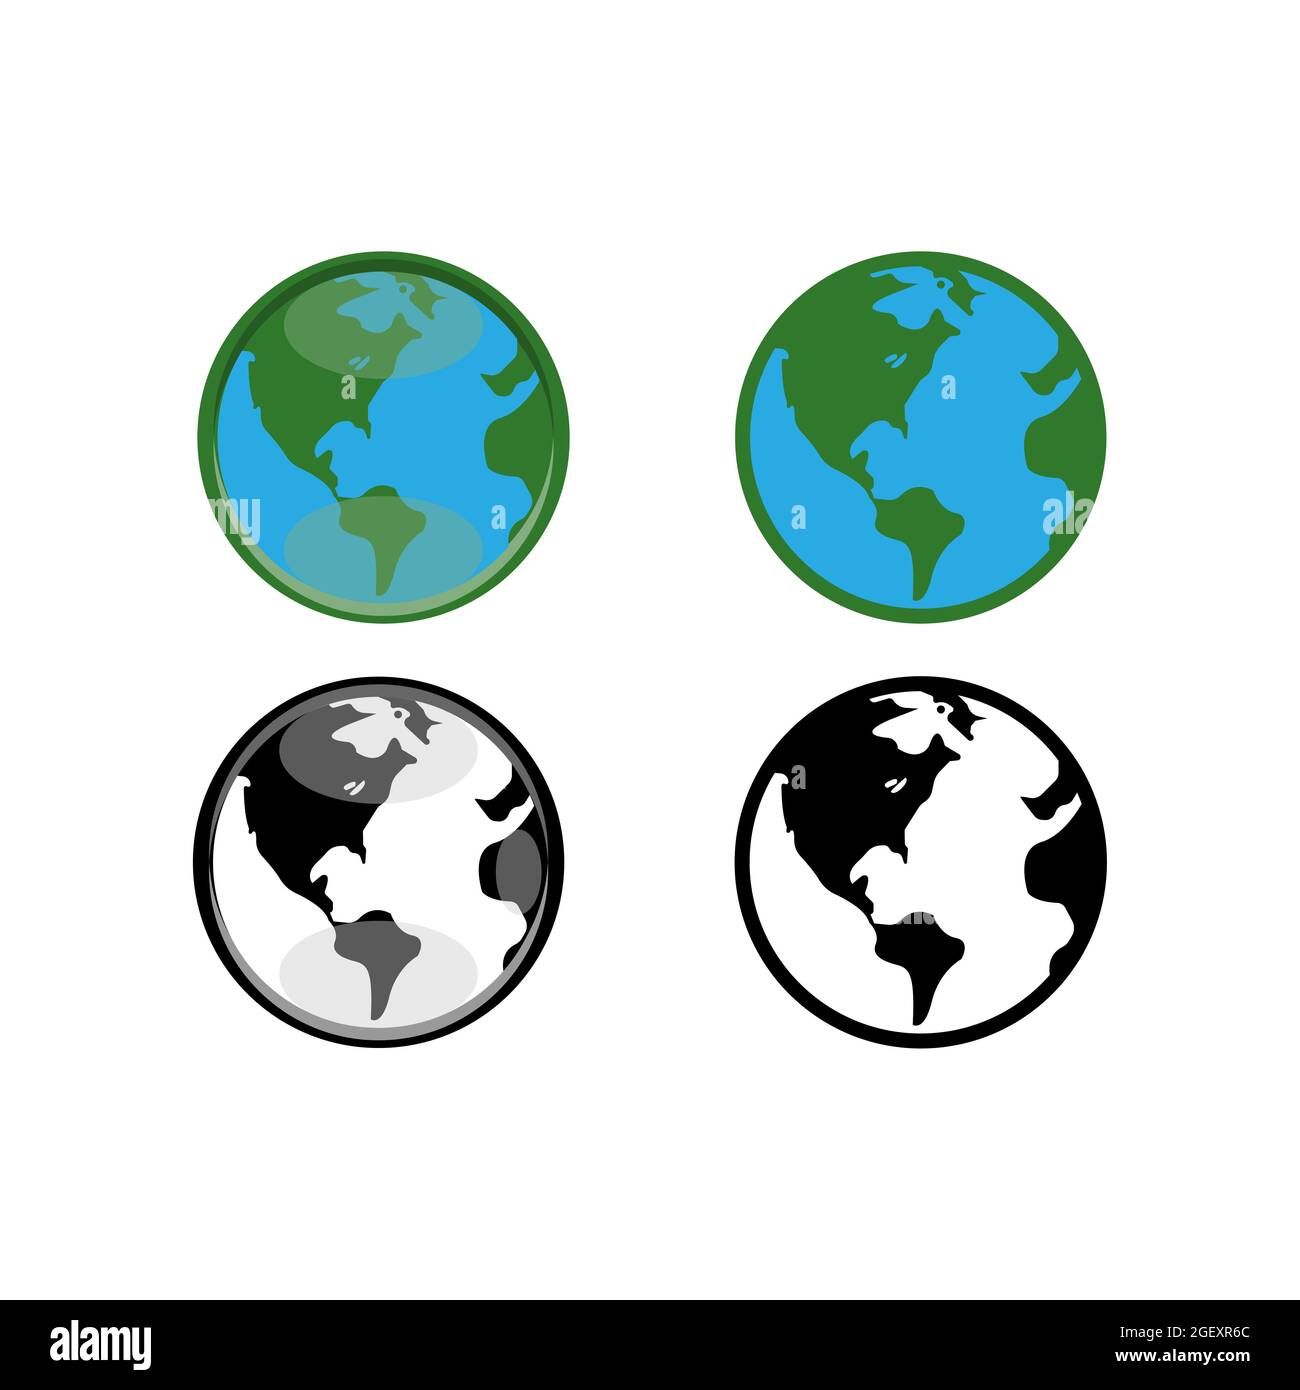 2d design vector illustration of planet earth in green blue and black and white color. great for icons and logos, planetary knowledge, nature, outdoor Stock Photo